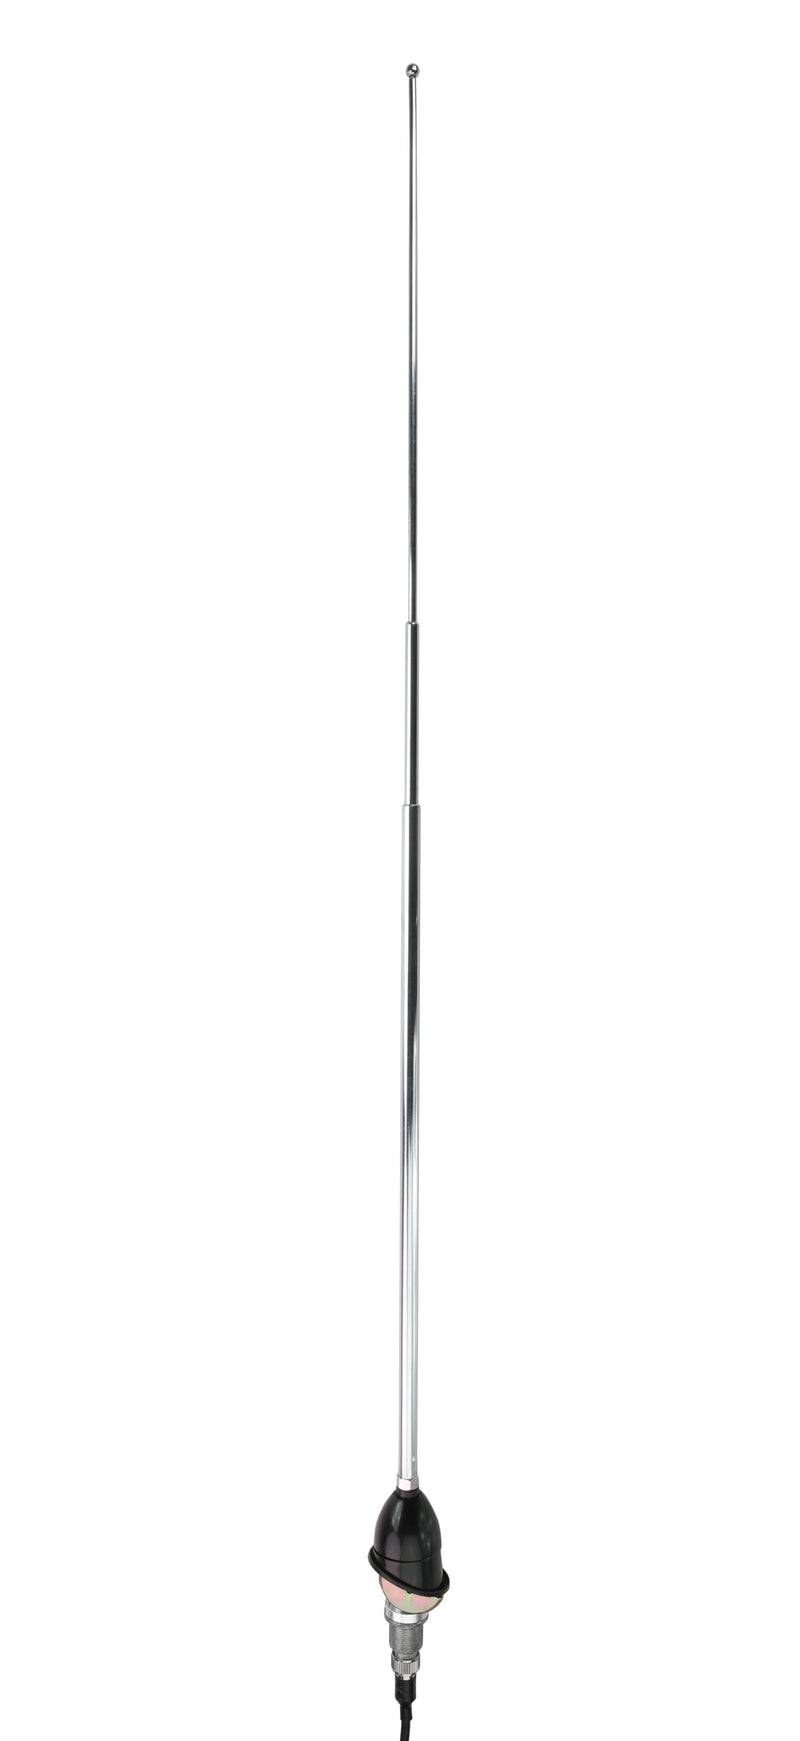 1949-52 Chevrolet Replacement Antenna